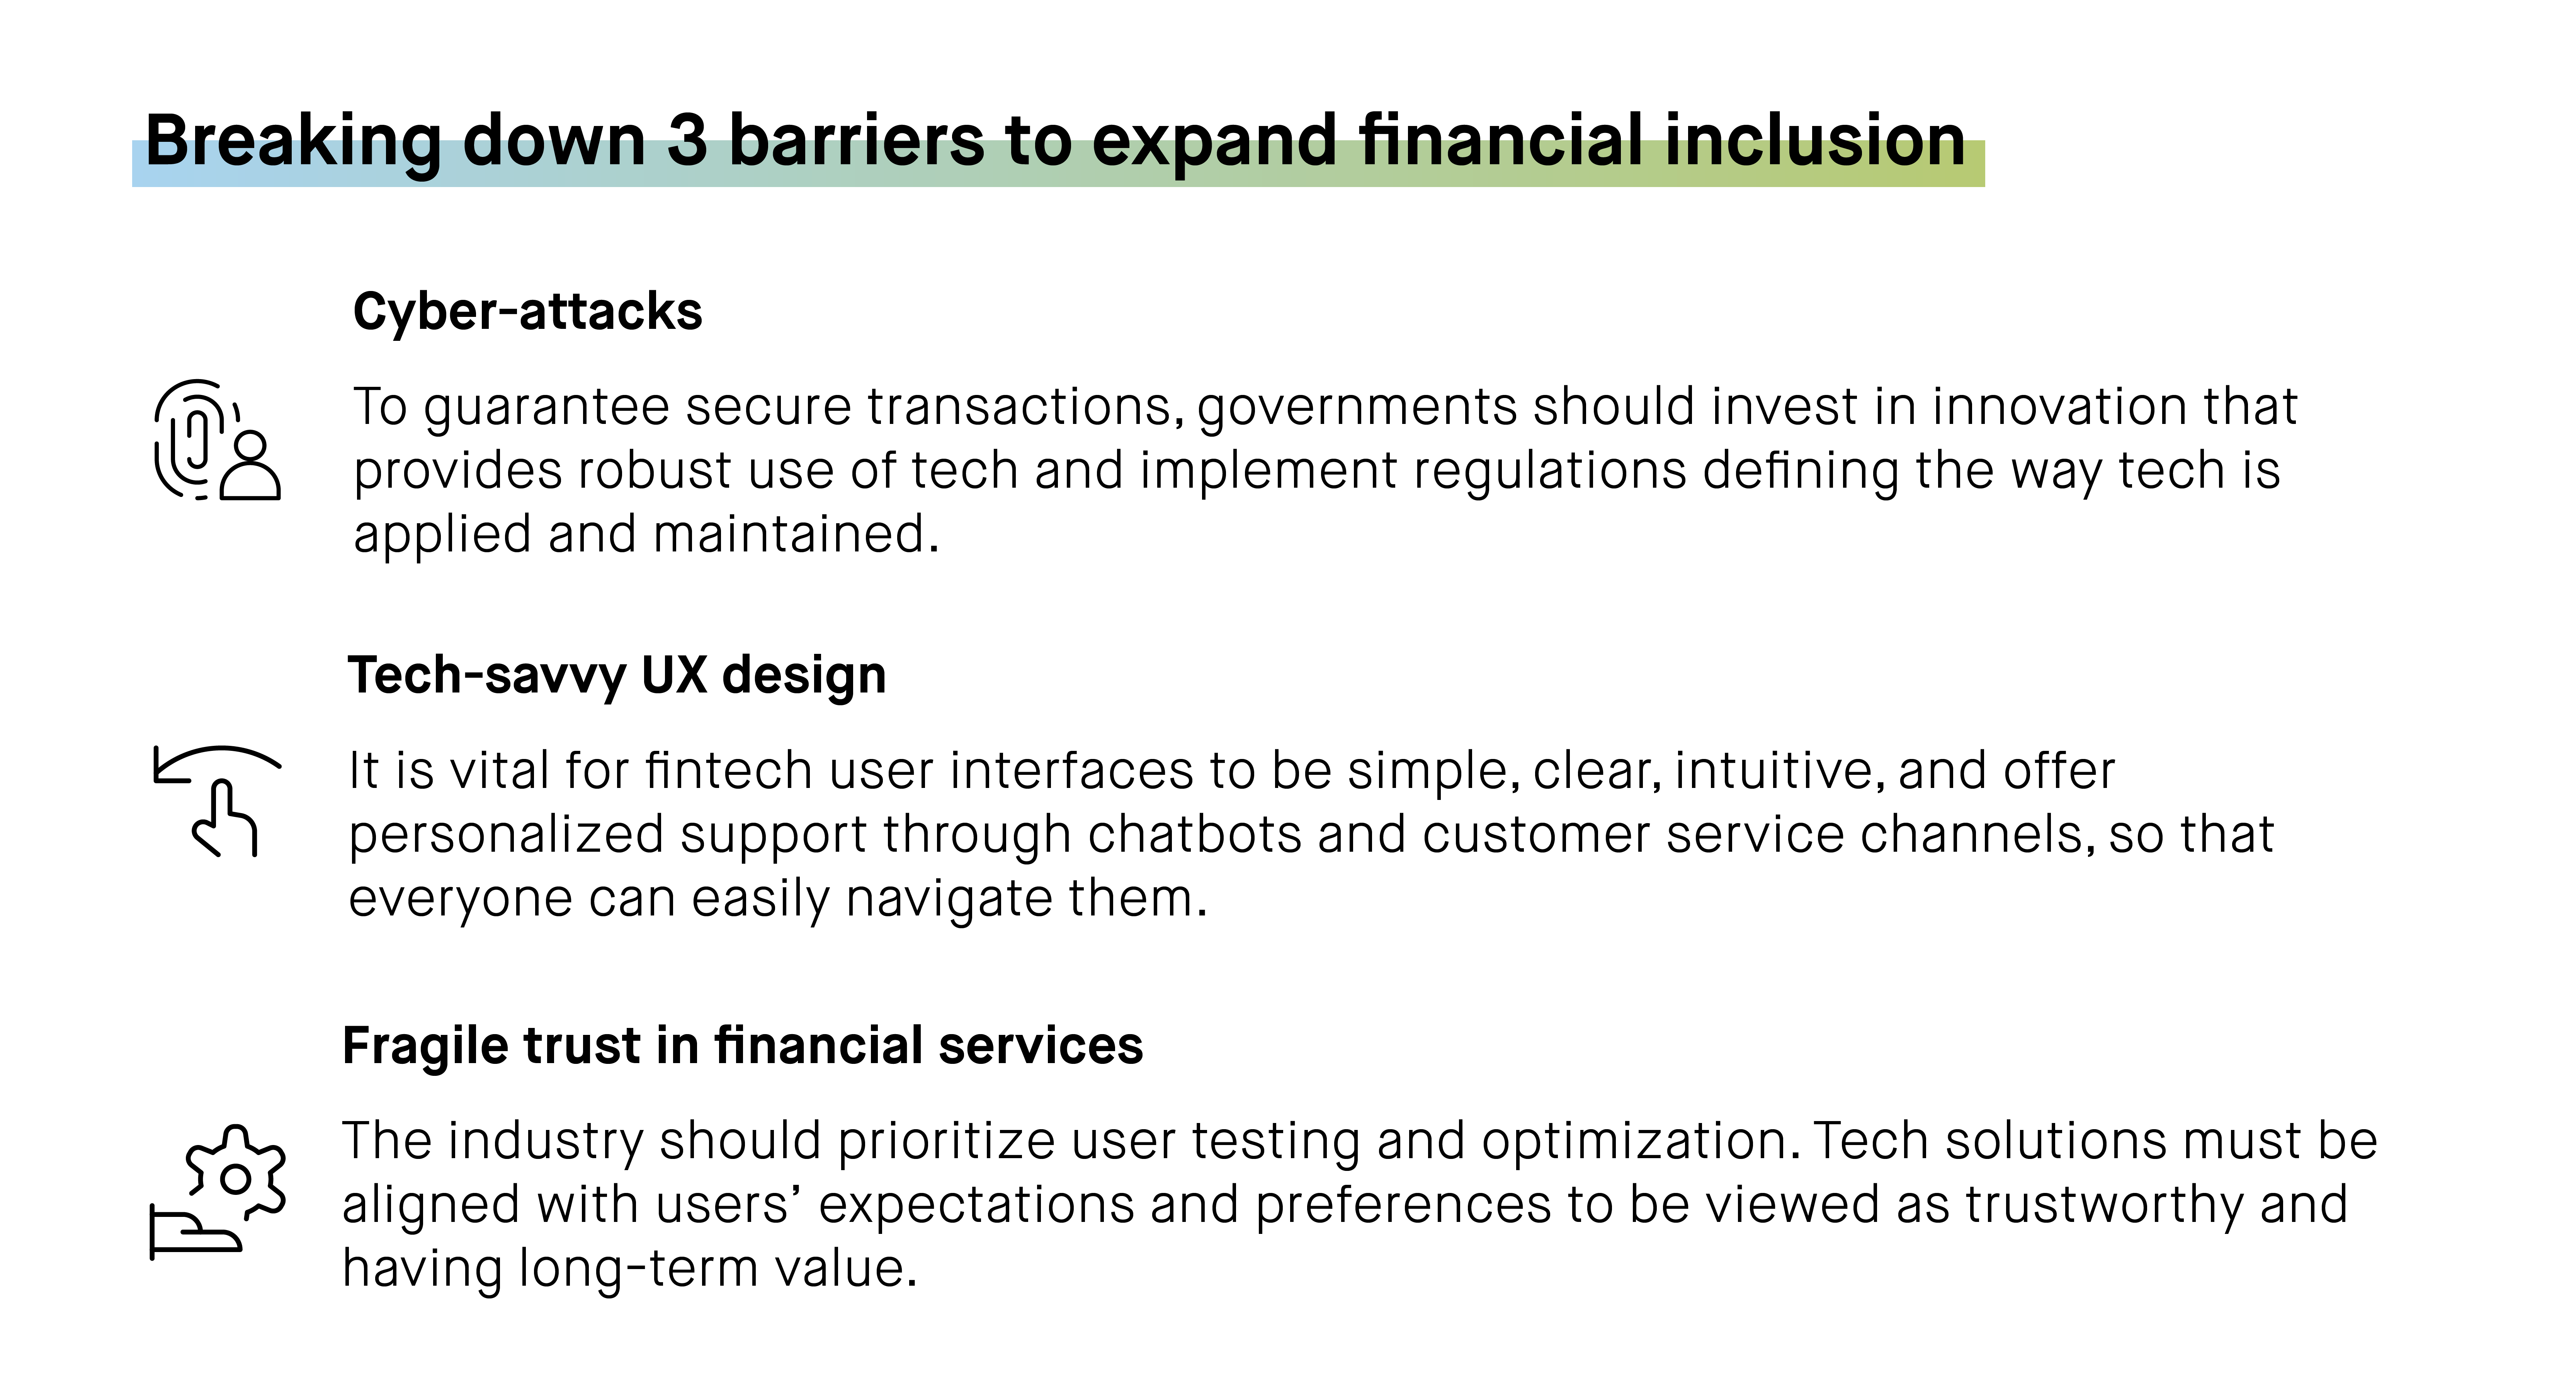 Breaking down 3 barriers to expand financial inclusion